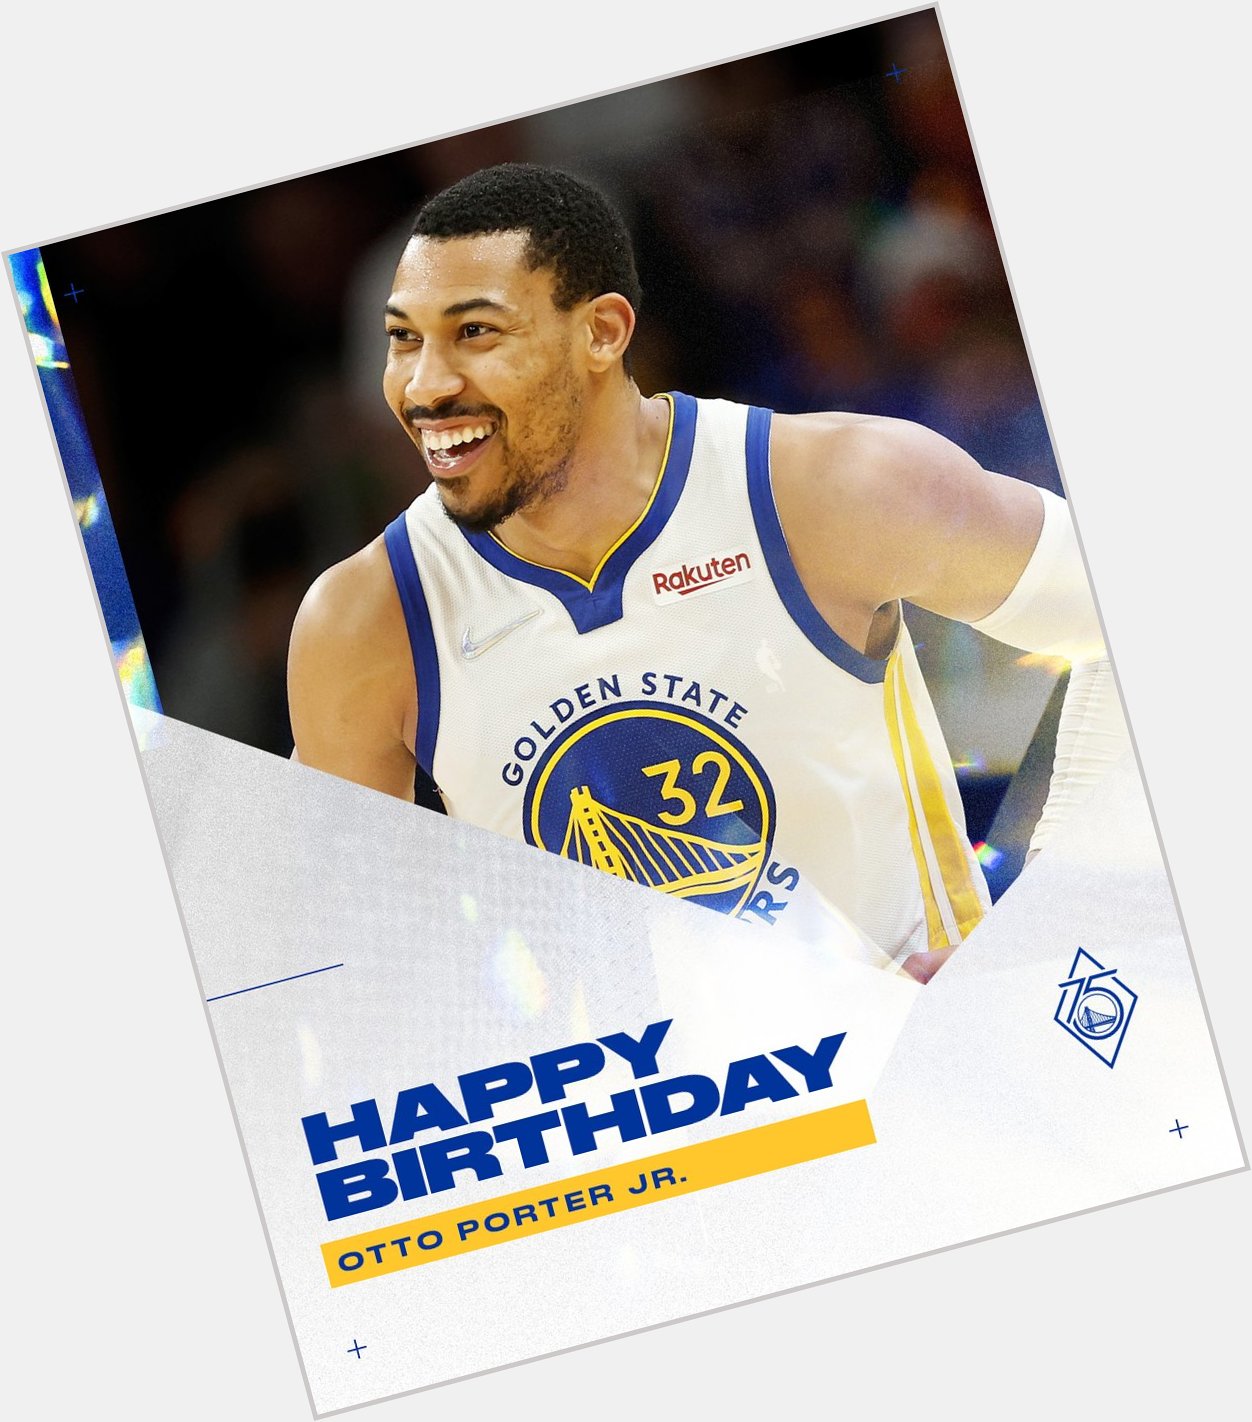 Wishing a Happy Birthday to our guy Otto Porter Jr. 